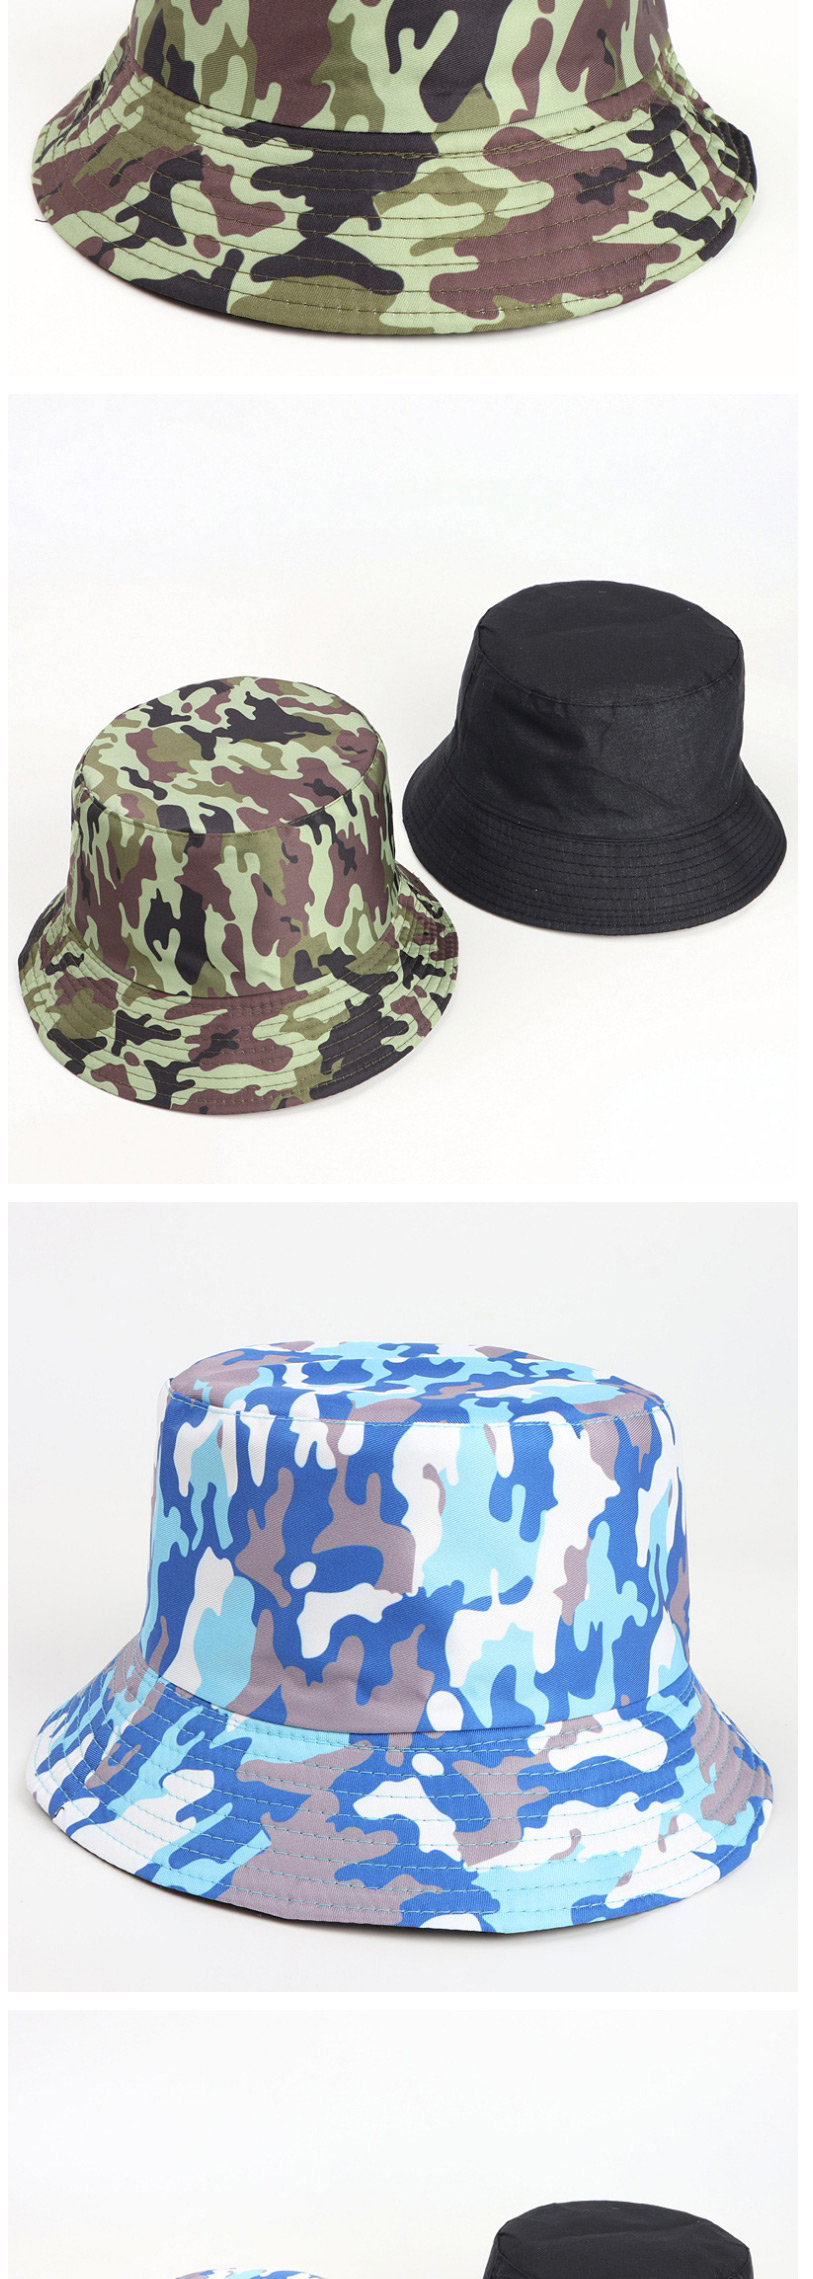 Fashion Navy Printed Double-sided Multicolor Camouflage Fisherman Hat,Sun Hats